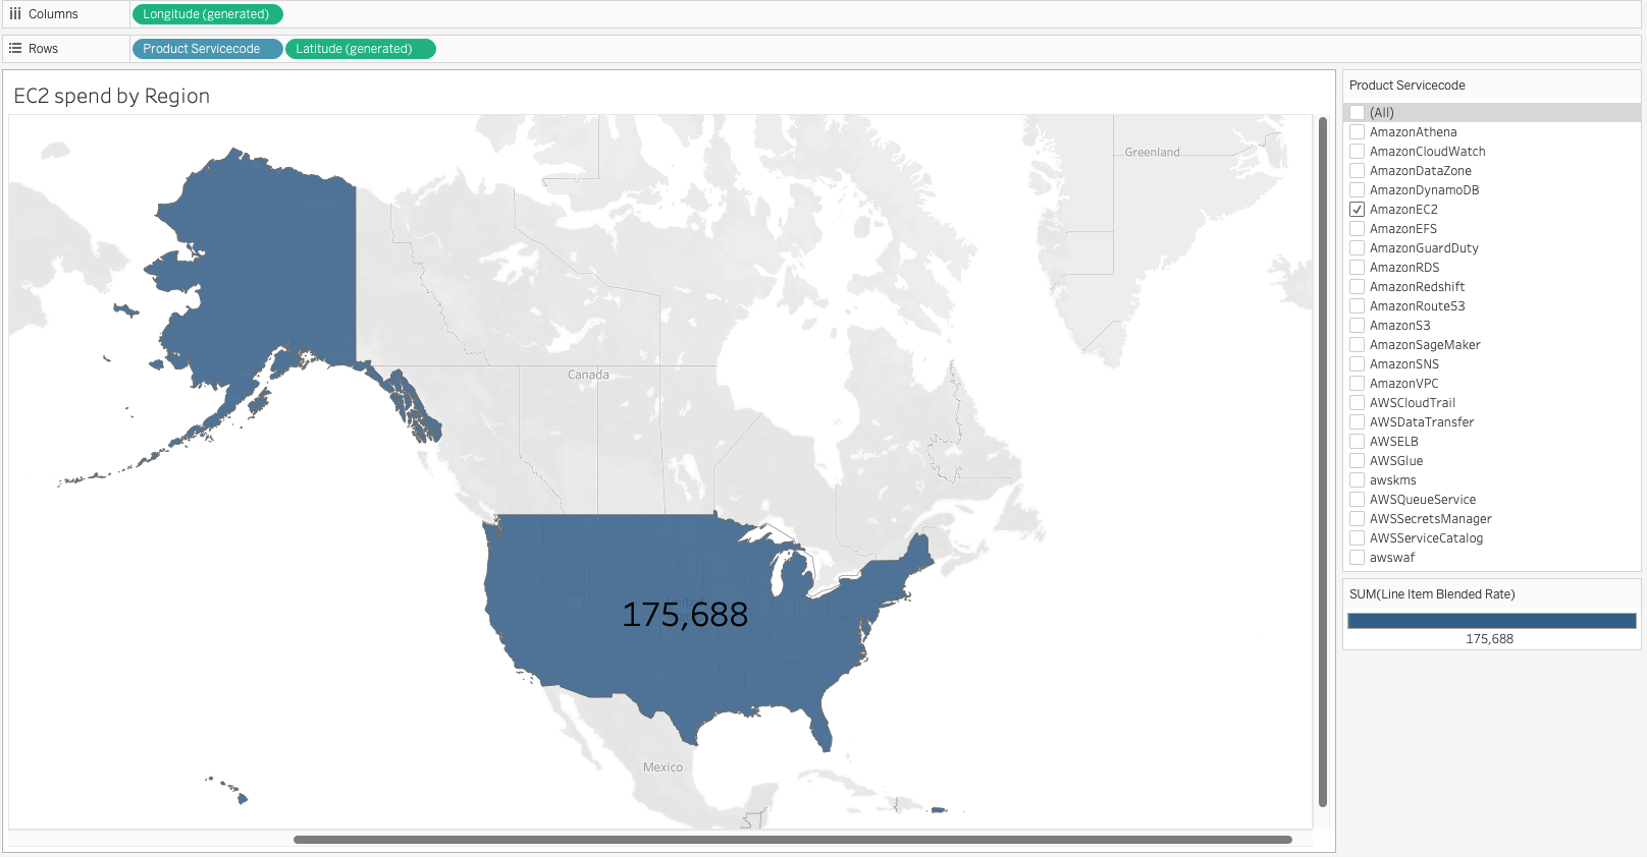 Data visualization of US map tracking specific AWS service spend by region